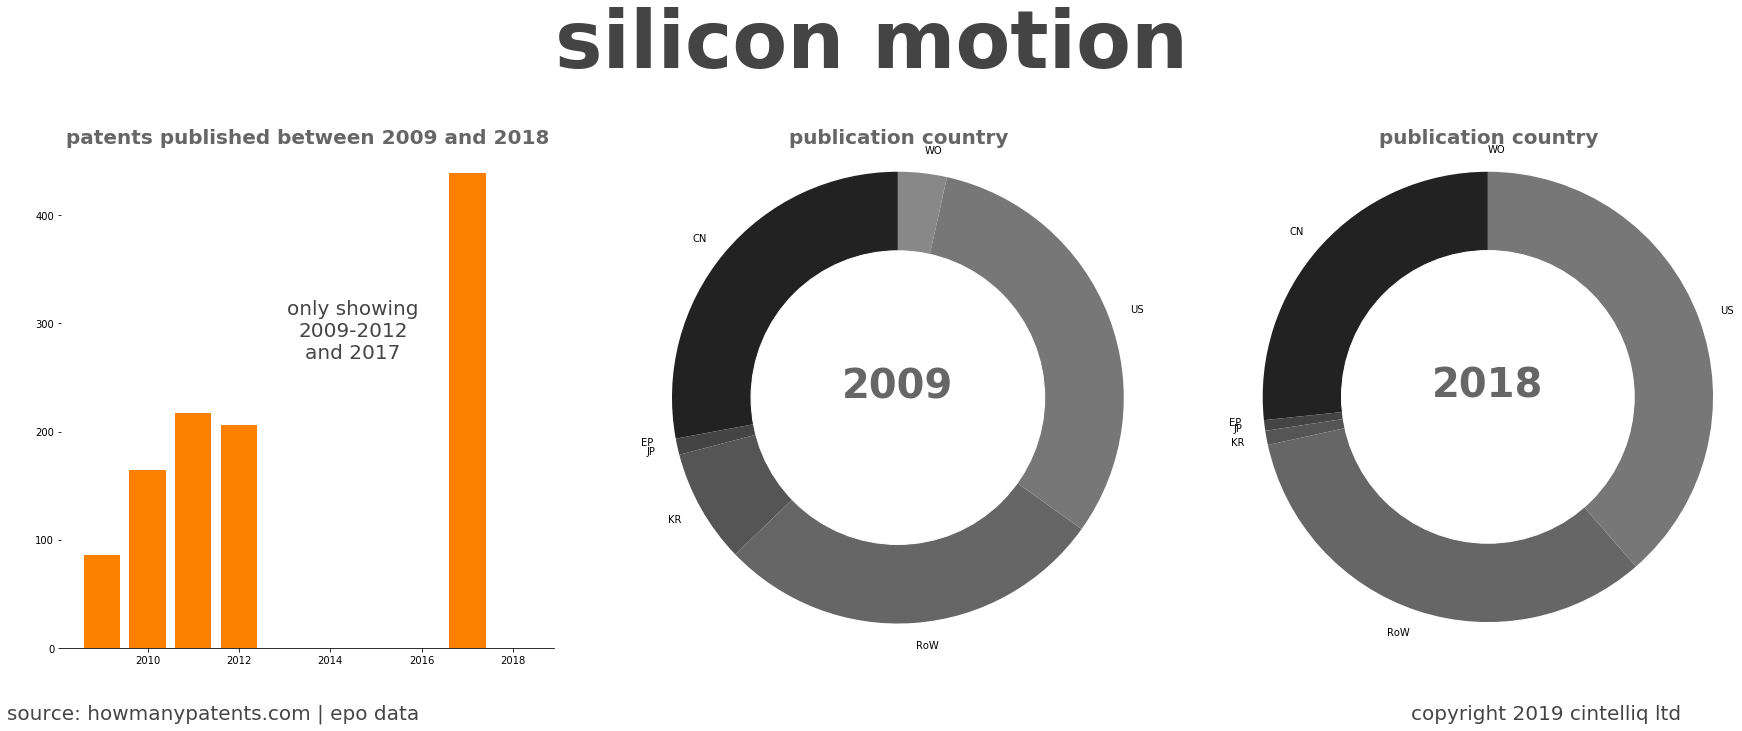 summary of patents for Silicon Motion